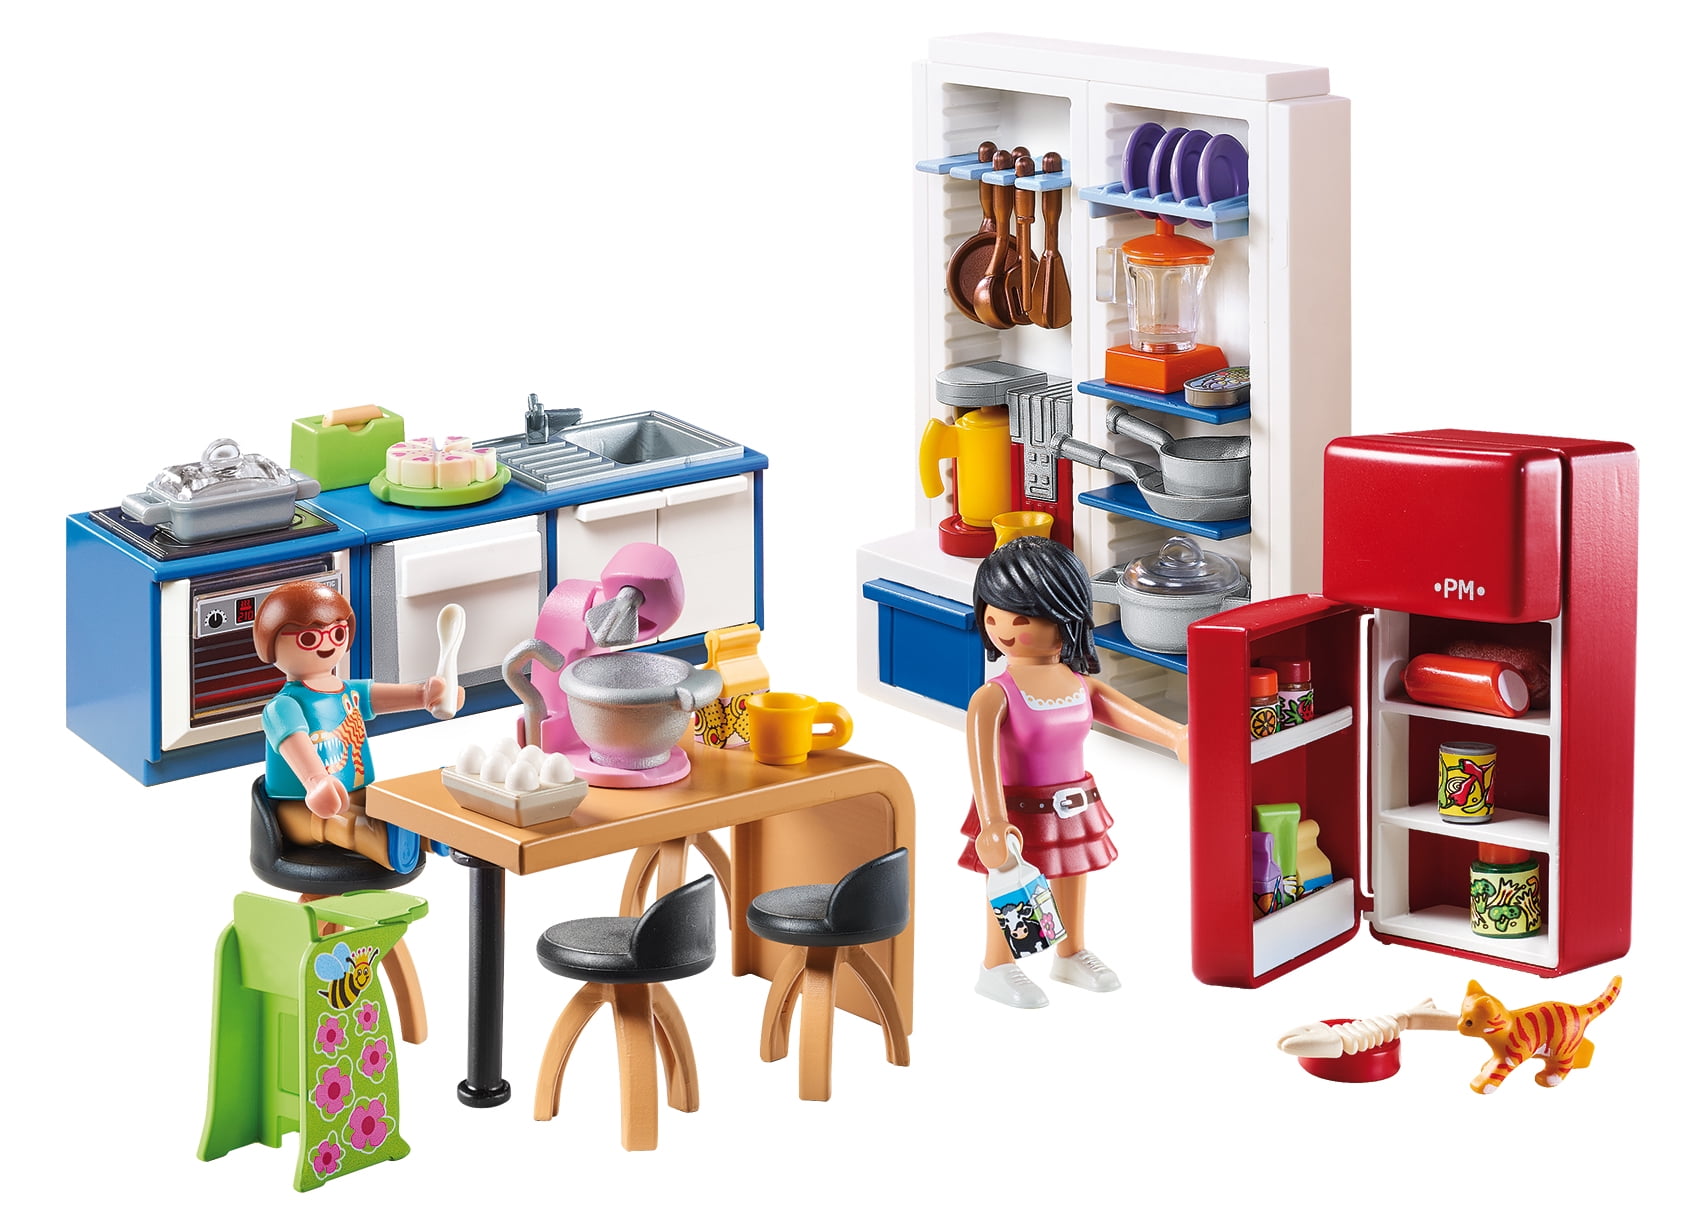 modern house-yellow & red chair kitchen coffee 4283 3989 Playmobil r215 